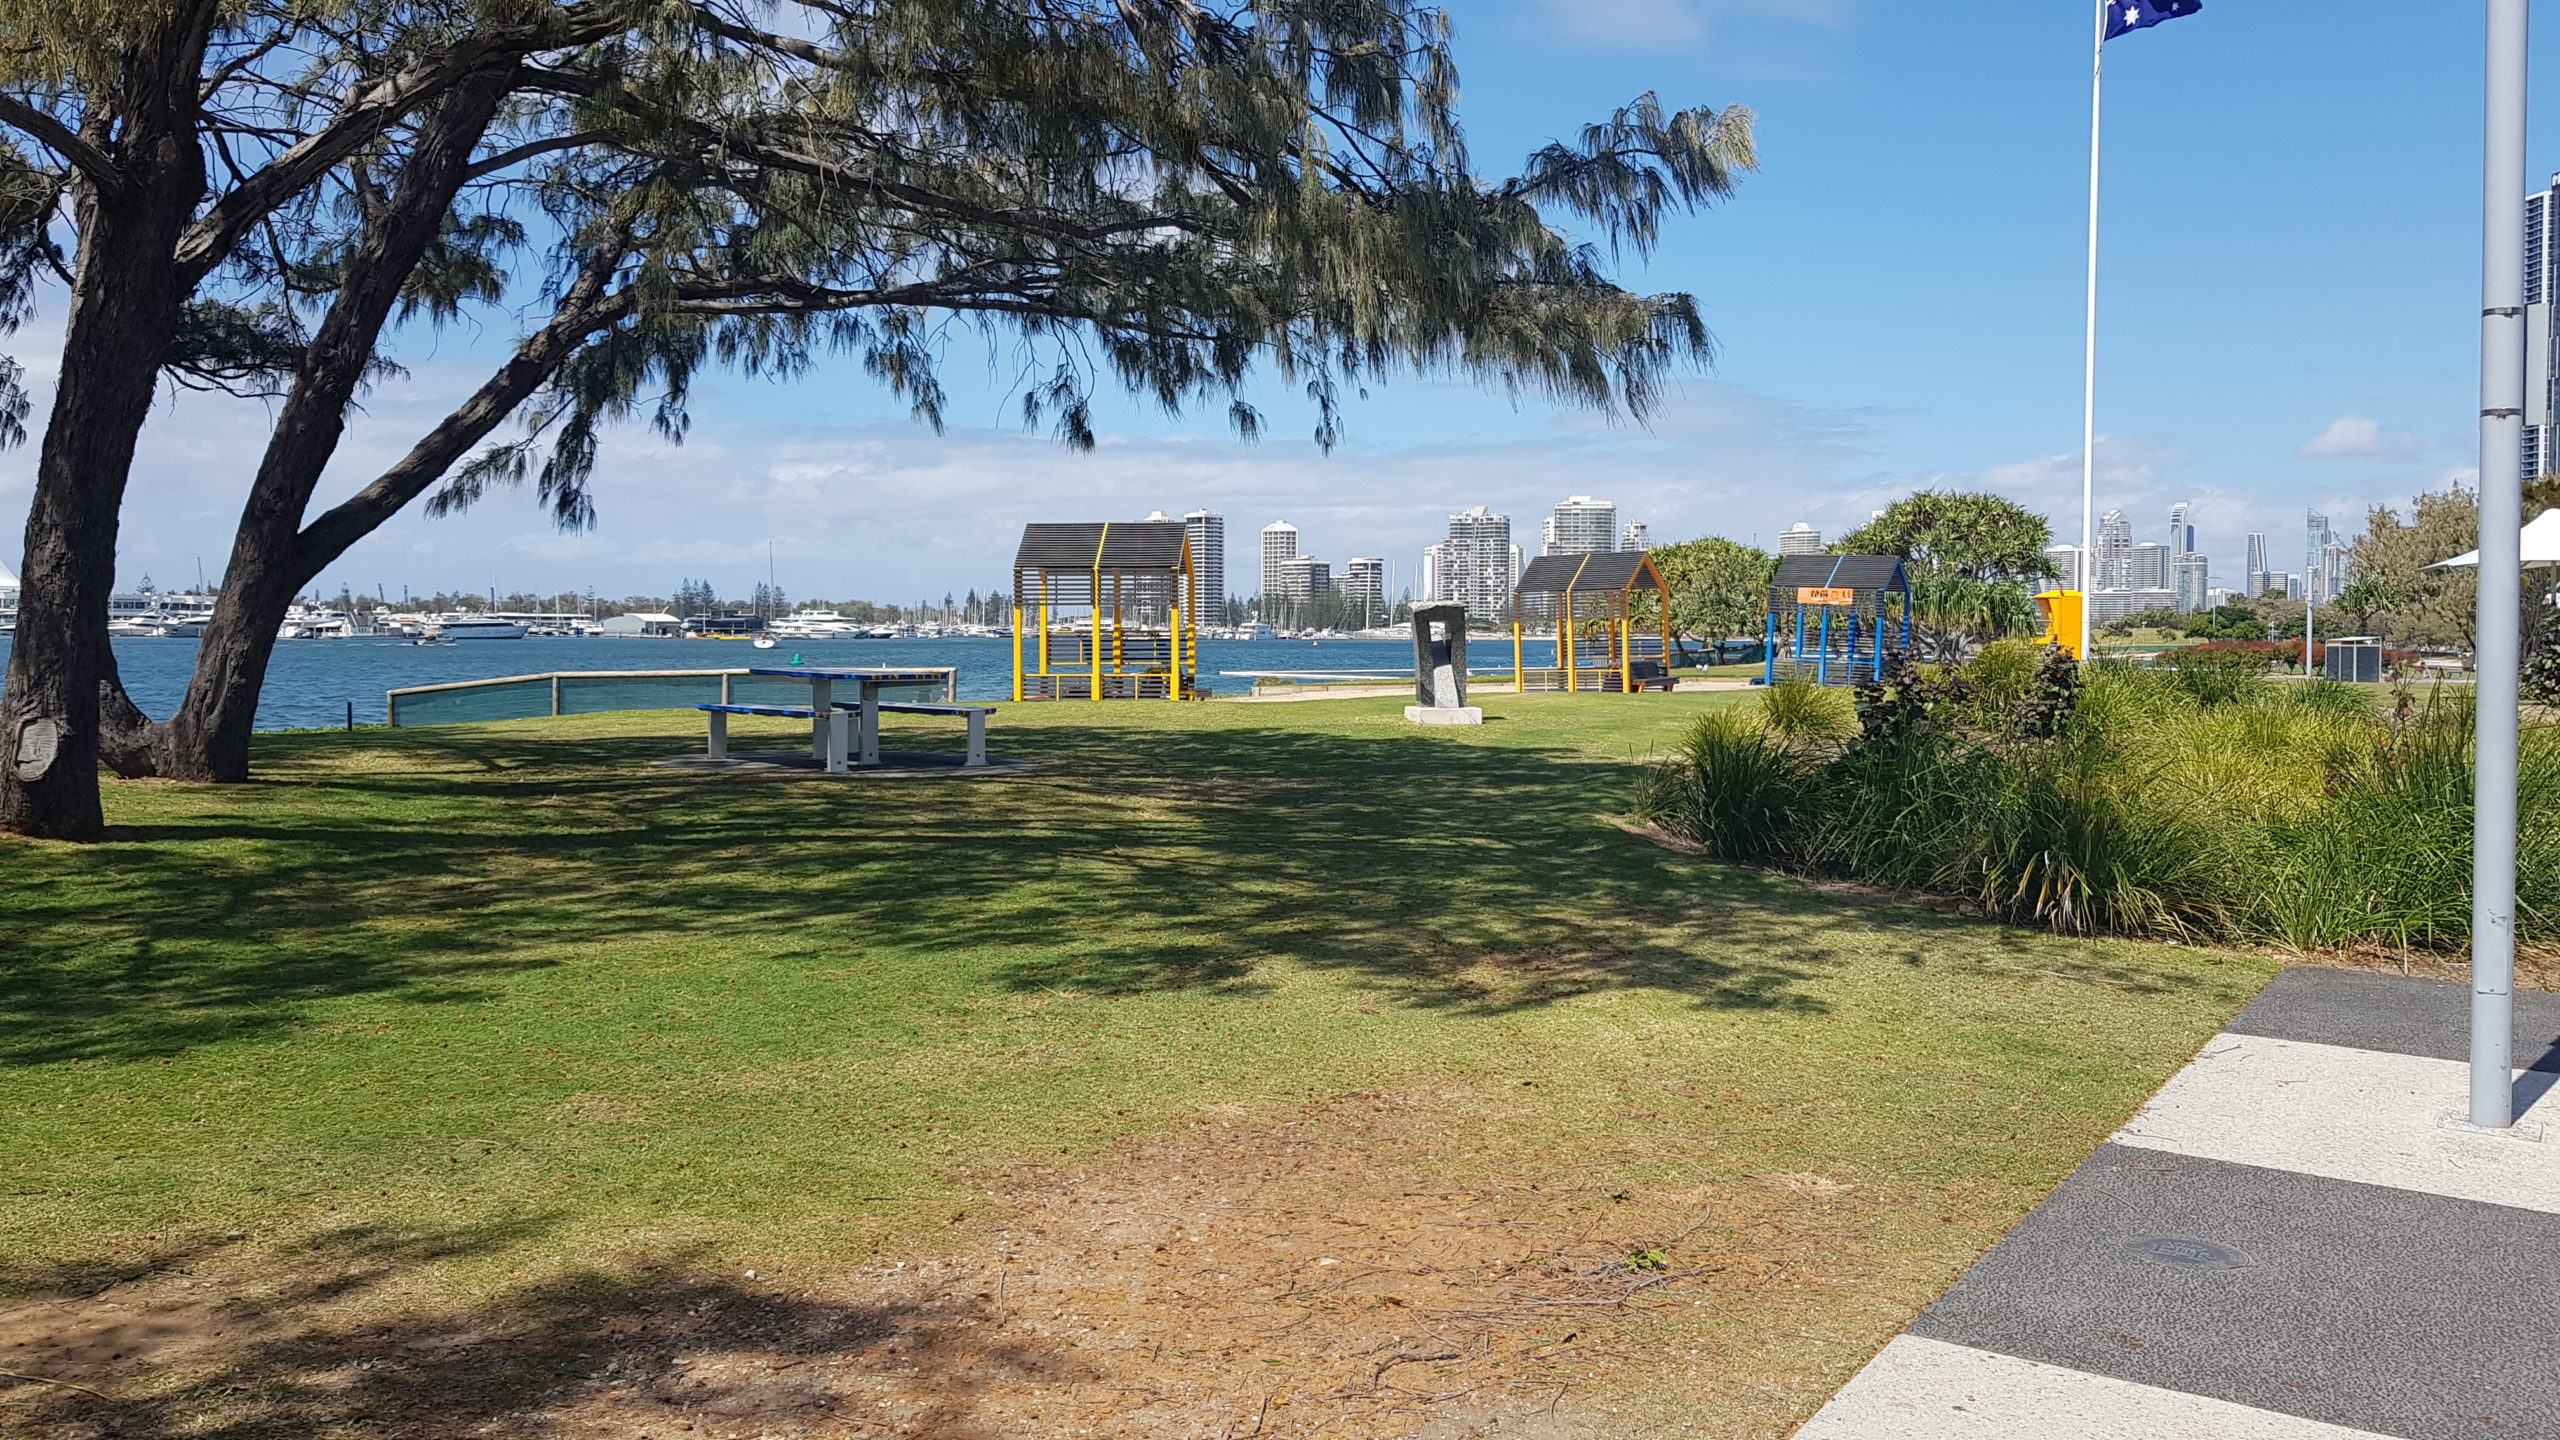 Broadwater Picnic Areas